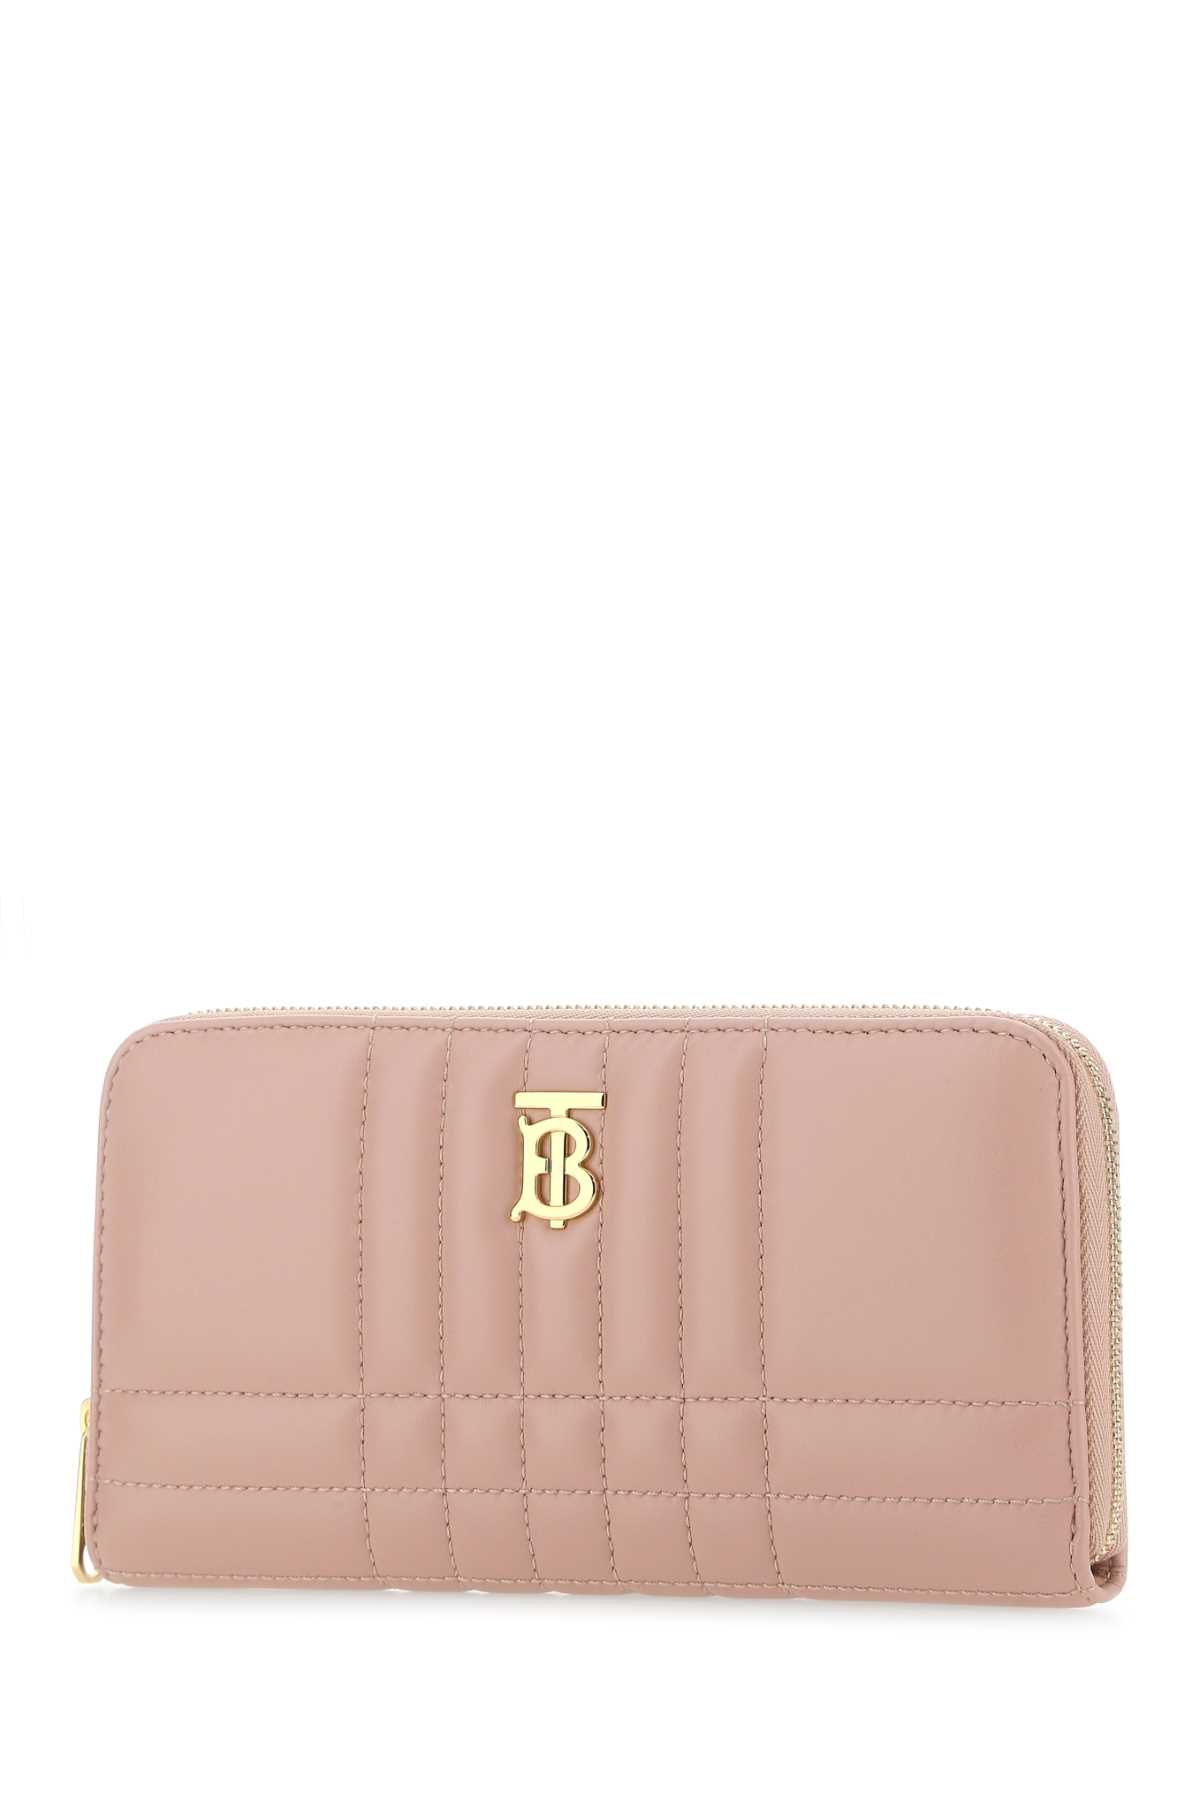 BURBERRY PINK NAPPA LEATHER LOLA WALLET